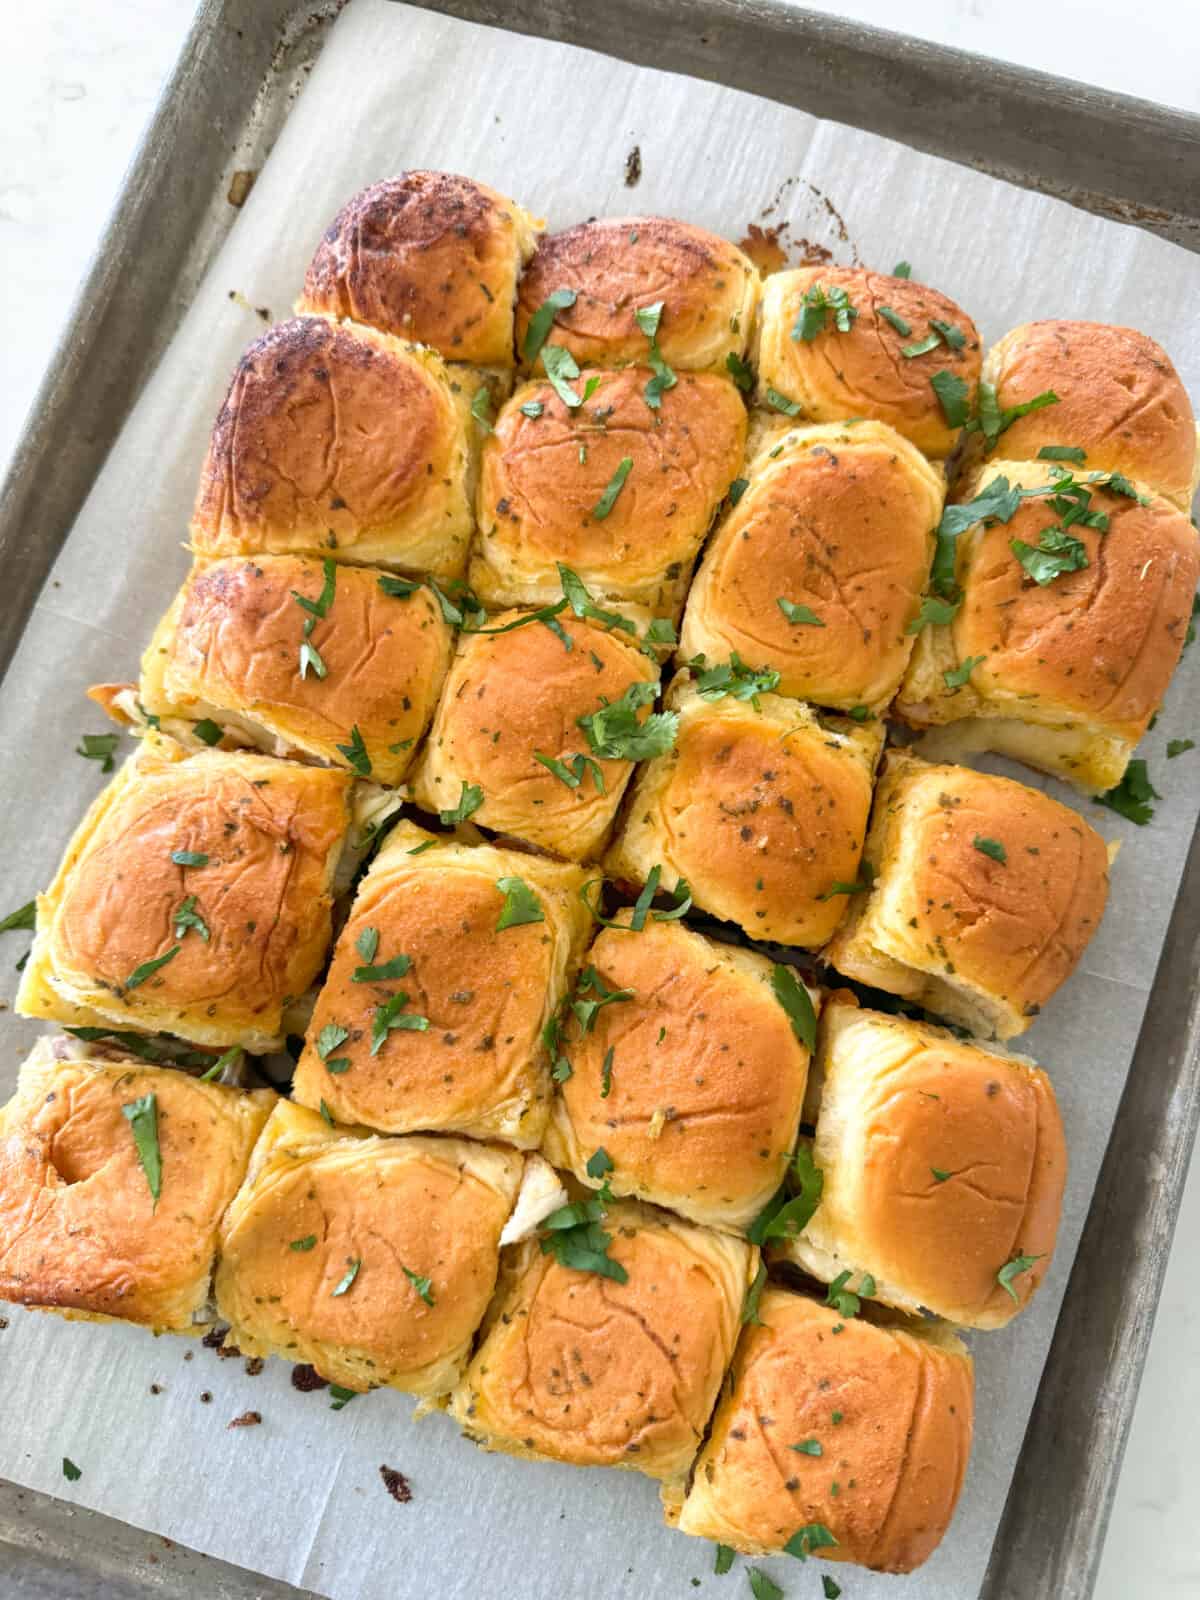 cilantro added to top of baked sliders